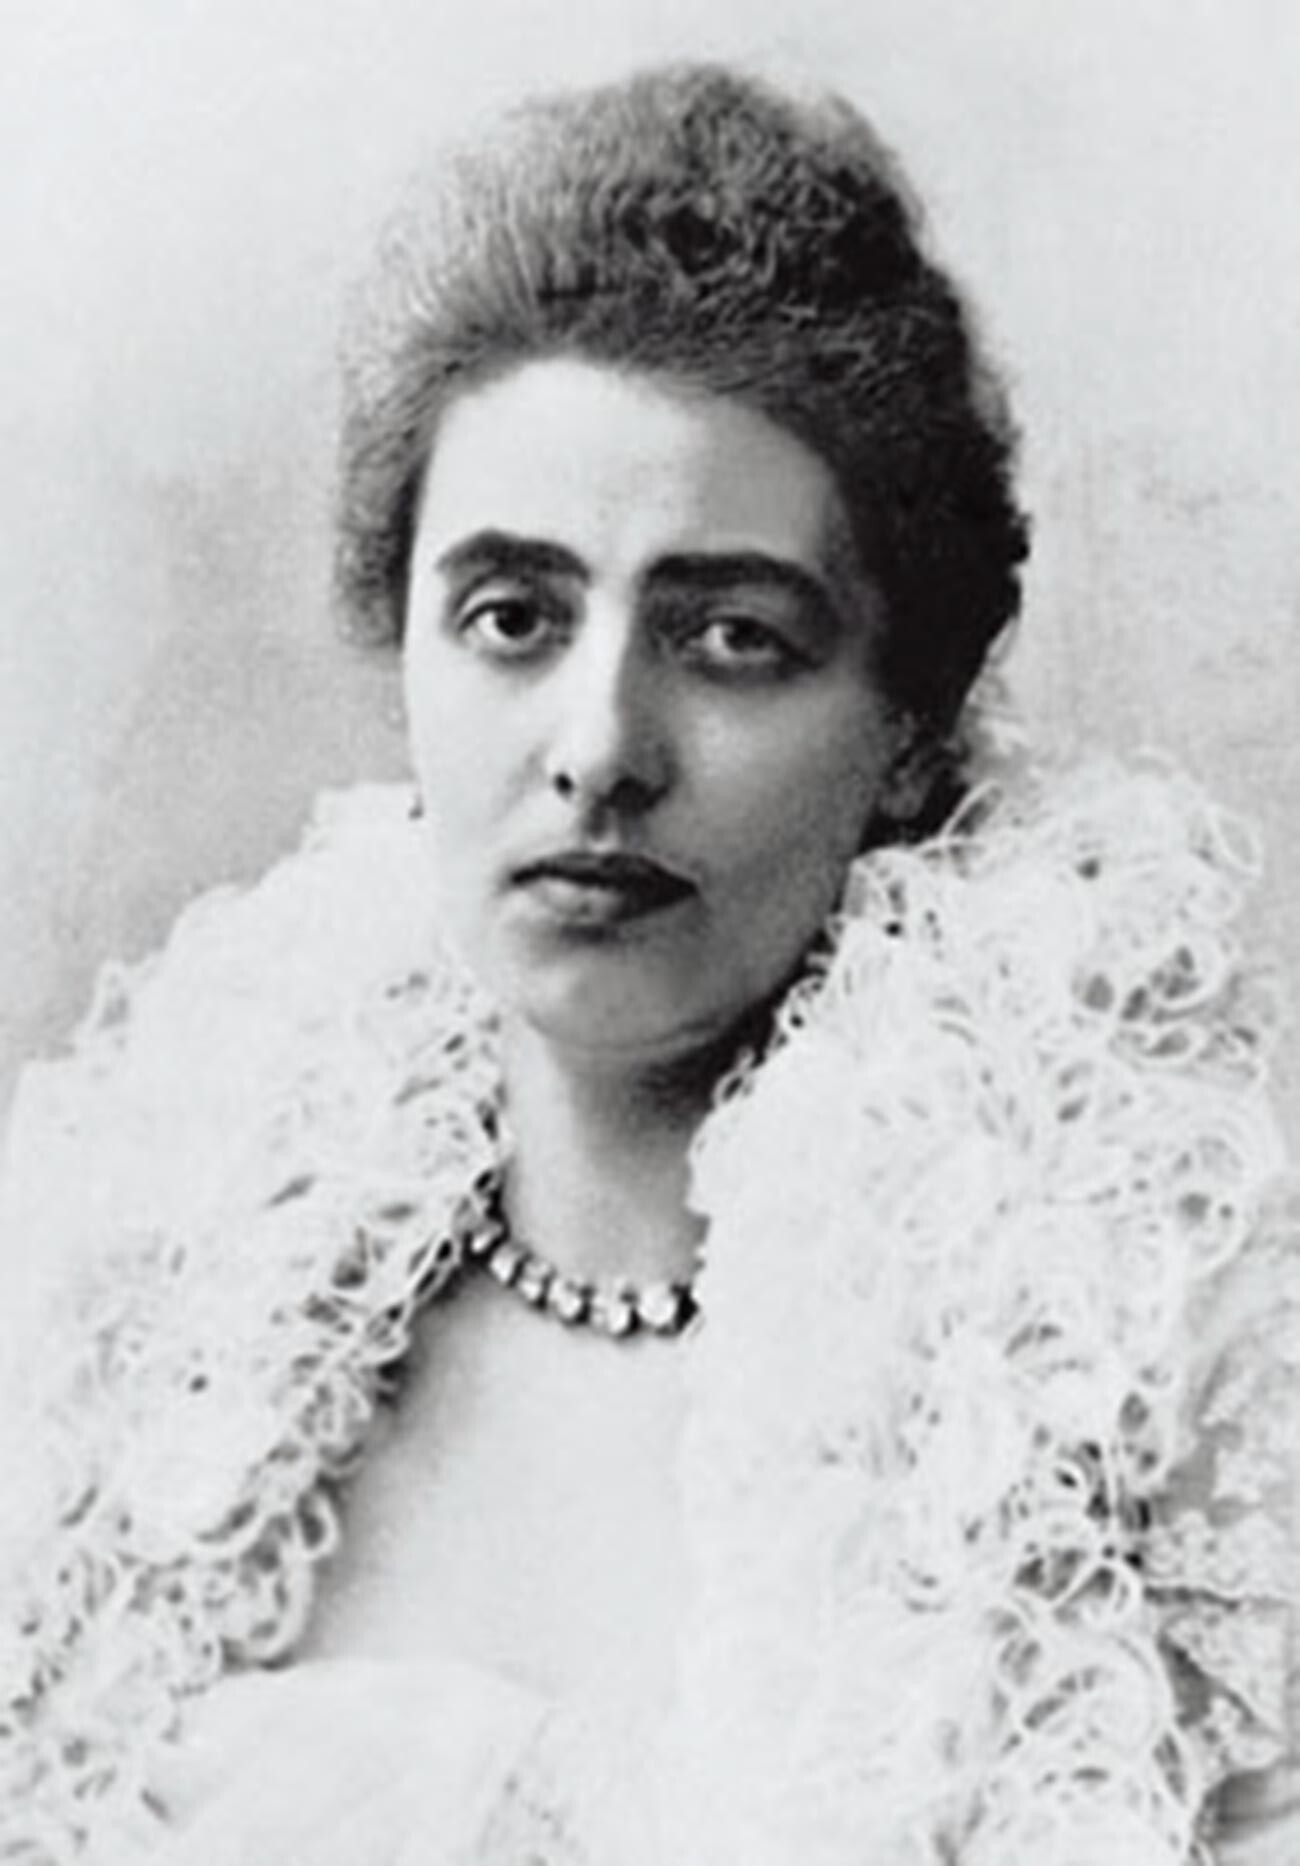 Vera Firsanova (1862-1934), one of the richest nobles of the Russian Empire and an outstanding philanthropist.